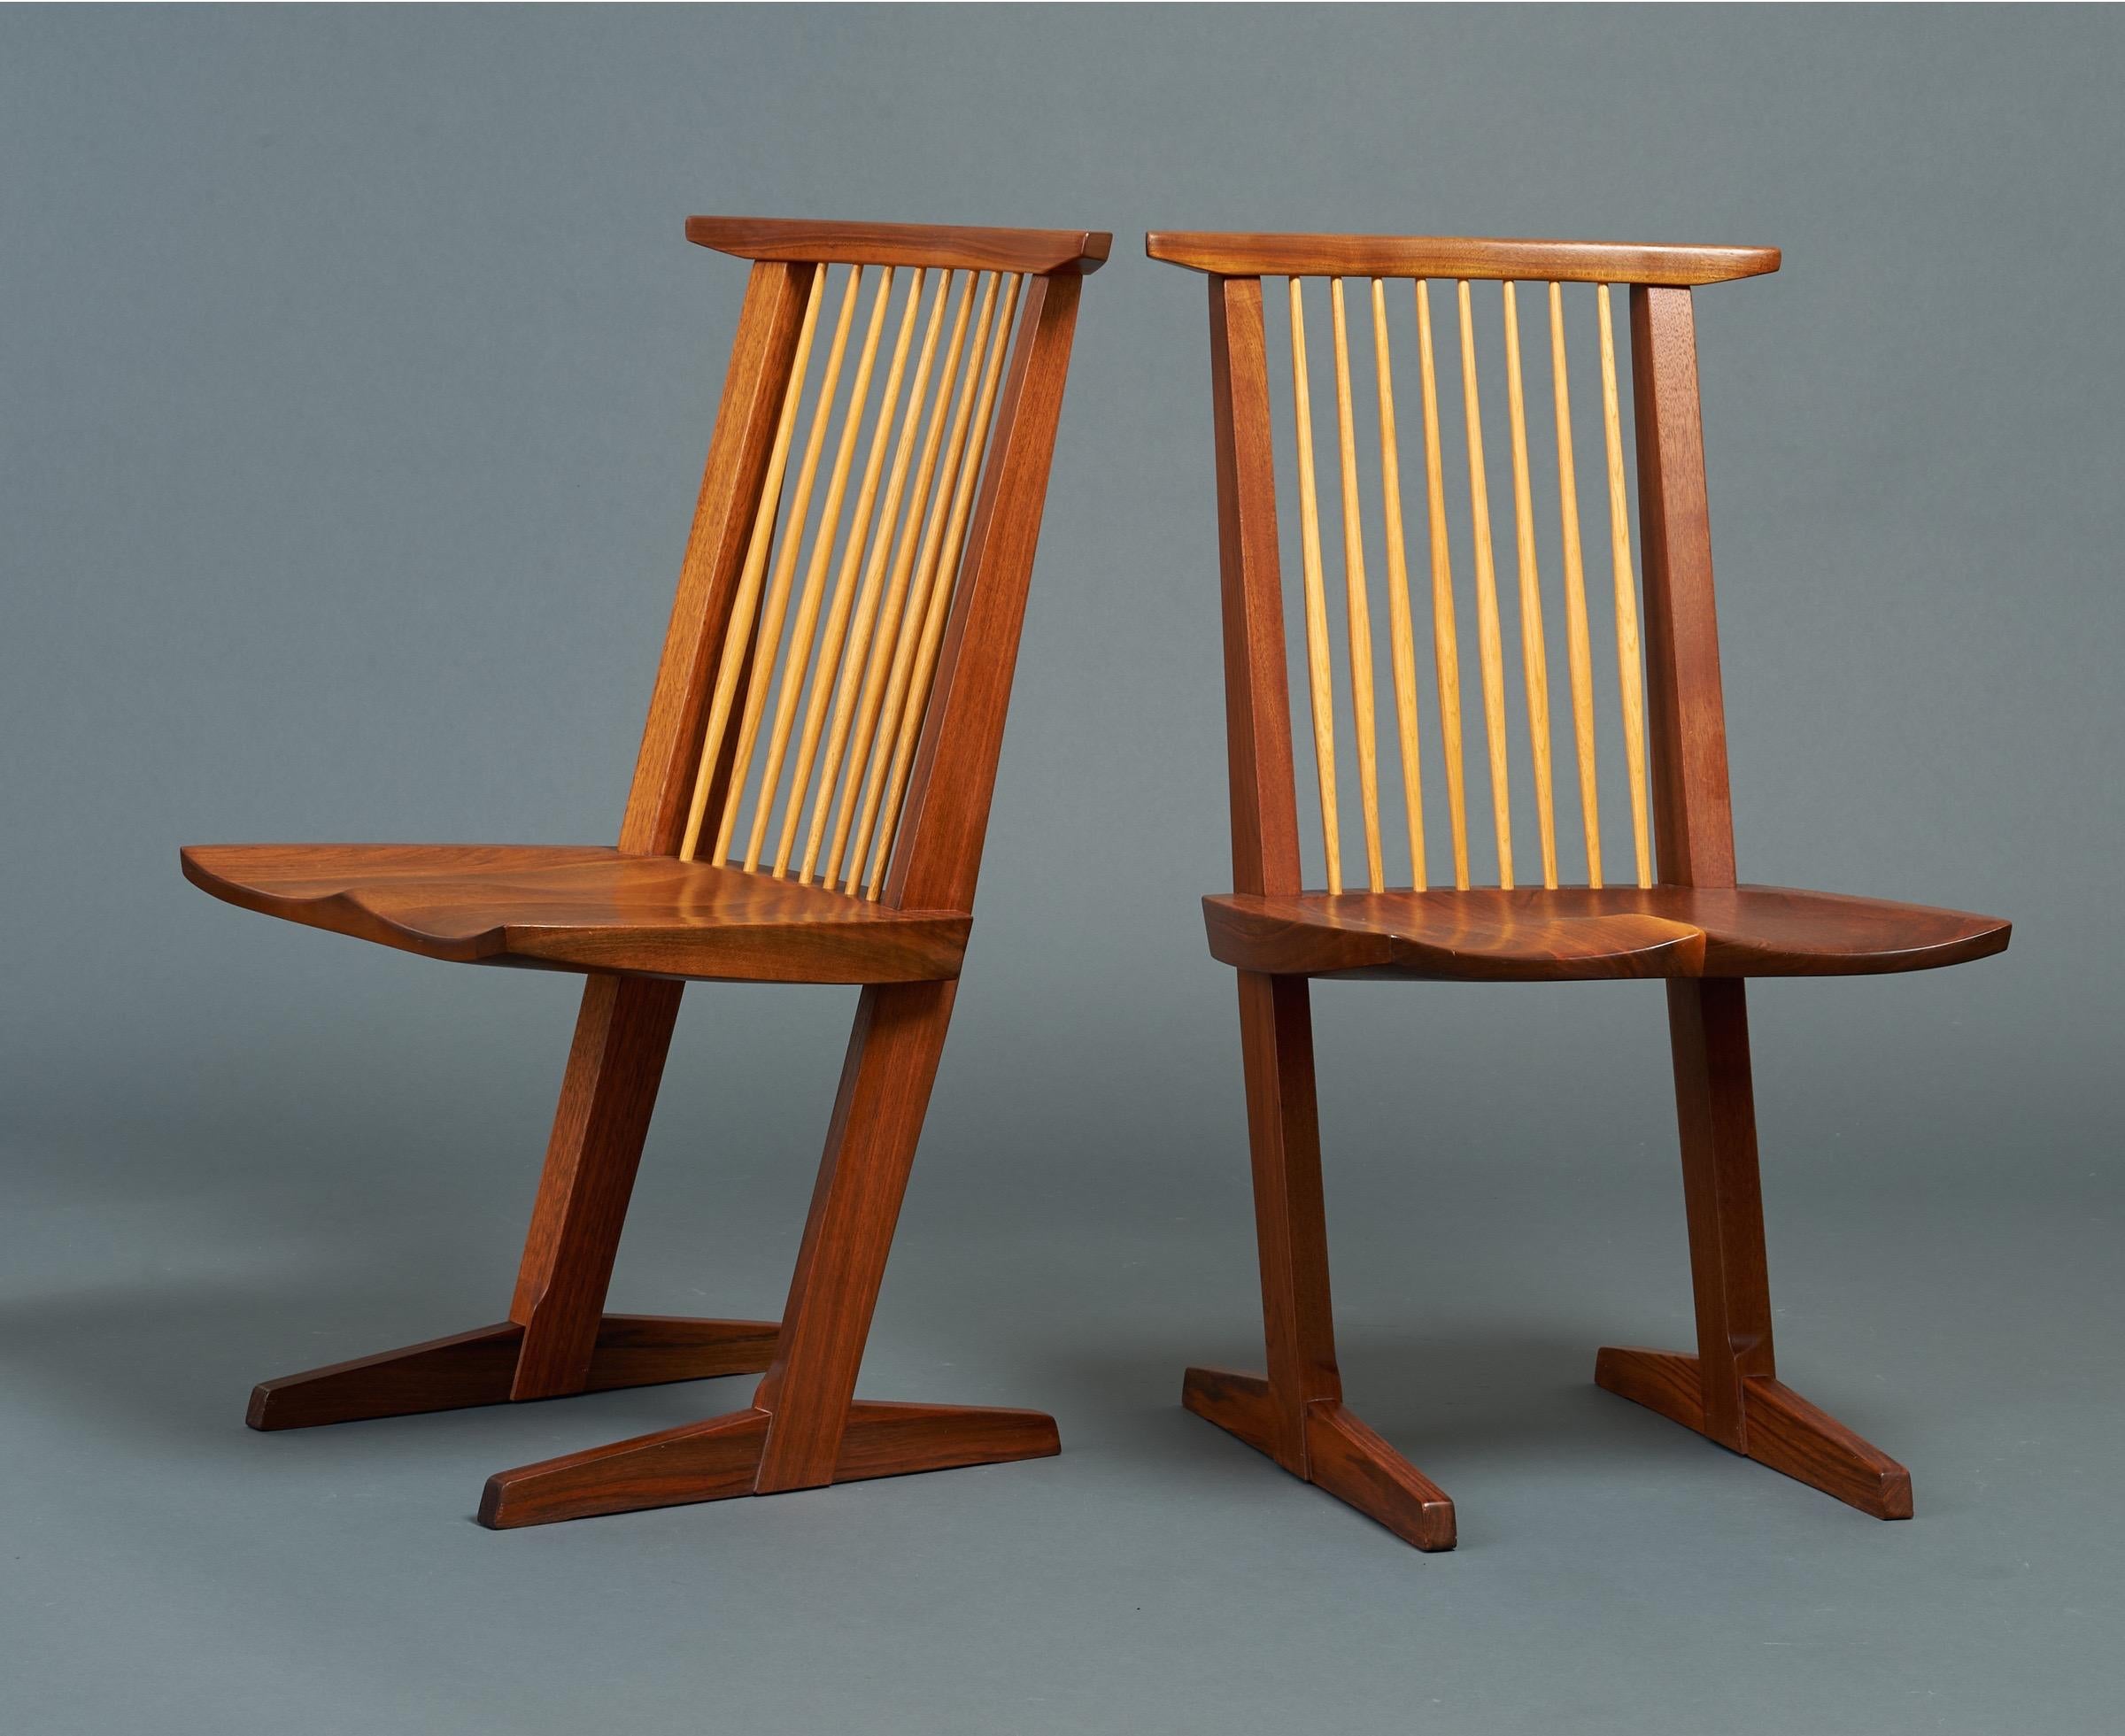 George Nakashima, Rare Sculptural Pair of Conoid Chairs in Walnut, Signed, 1989 In Excellent Condition For Sale In New York, NY